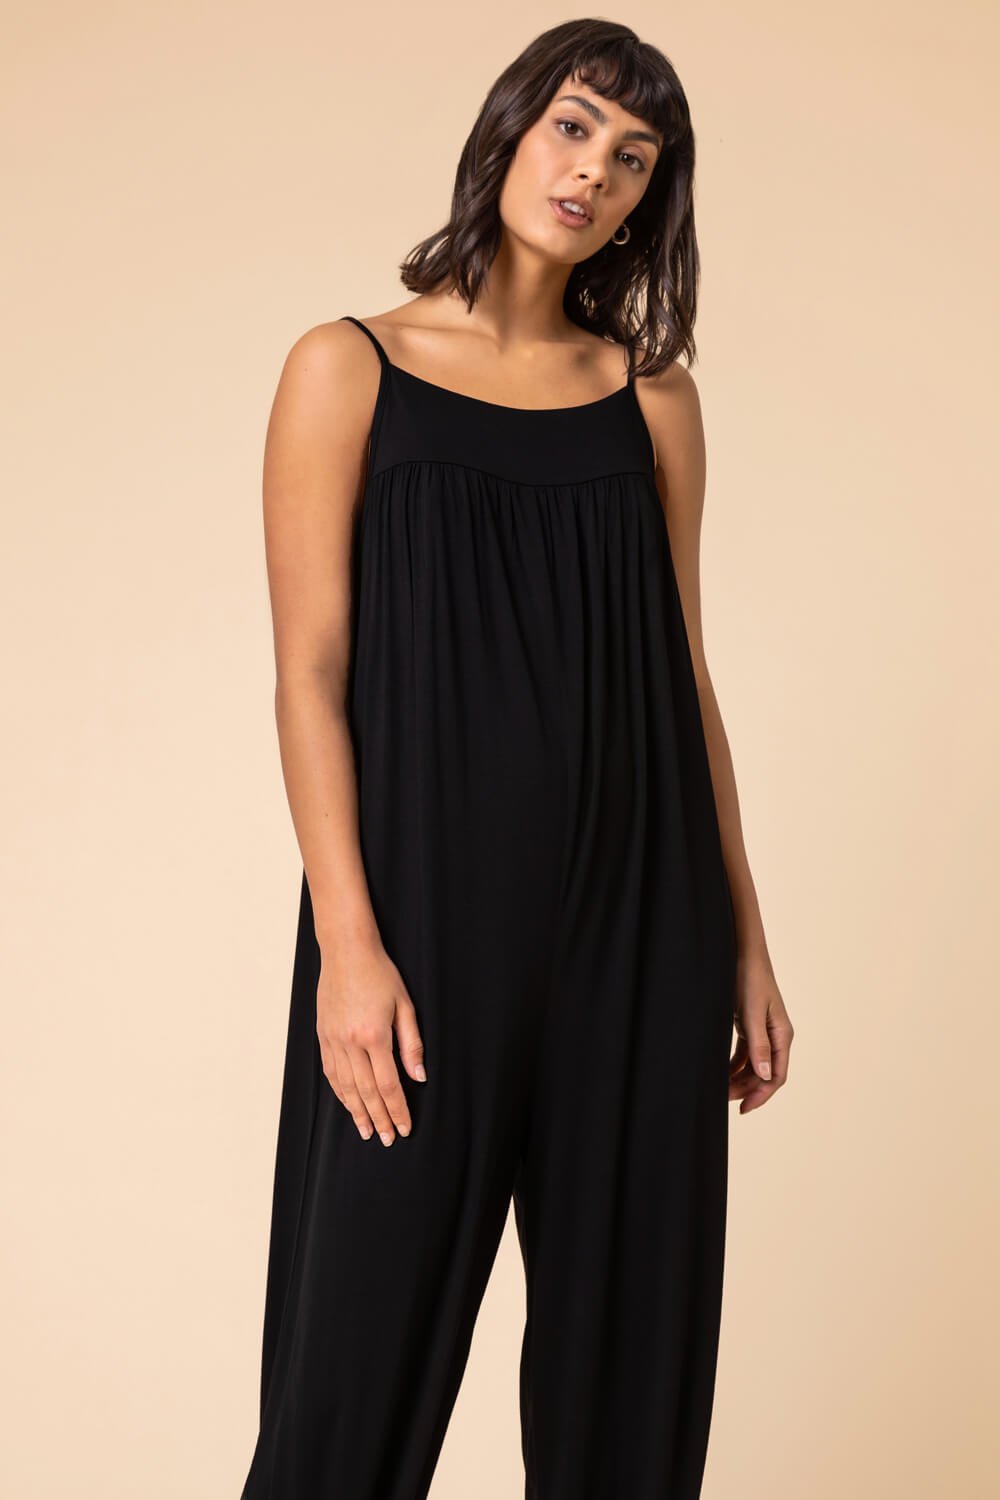 Black Strappy Full Length Jersey Jumpsuit, Image 3 of 5